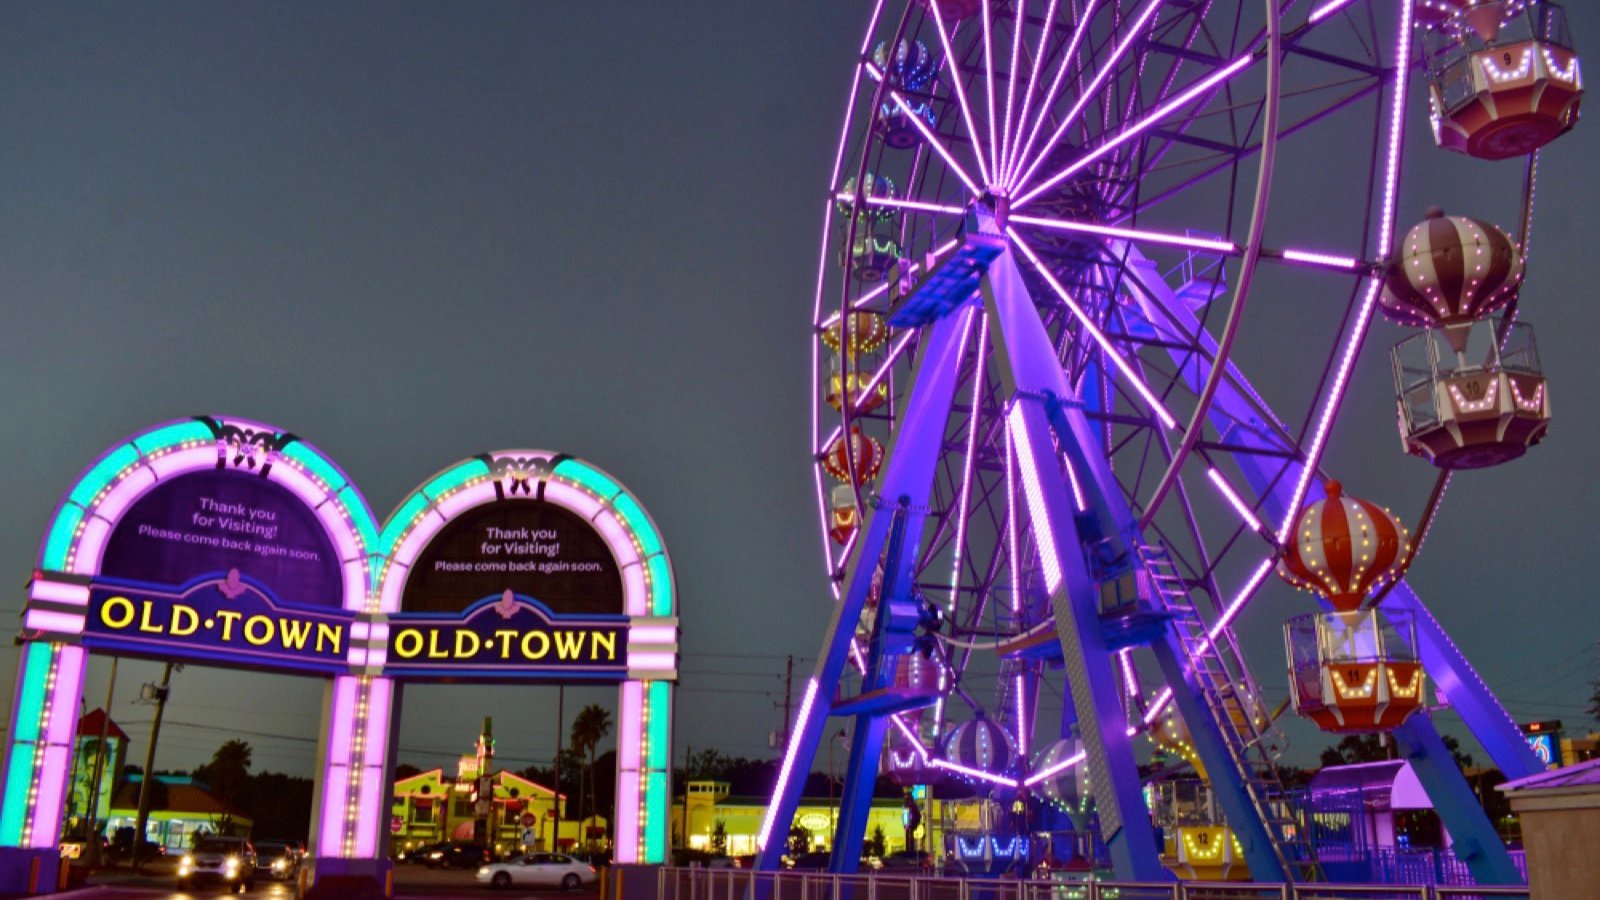 <p>After surviving the killer alligator tour, you and your family can have fun in Old Town Kissimmee. The town offers free entertainment each night, including a weekly classic car cruise. You can also ride the 86-foot tall Ferris wheel imported from Italy and test your video game skills in the town’s family fun center.</p>